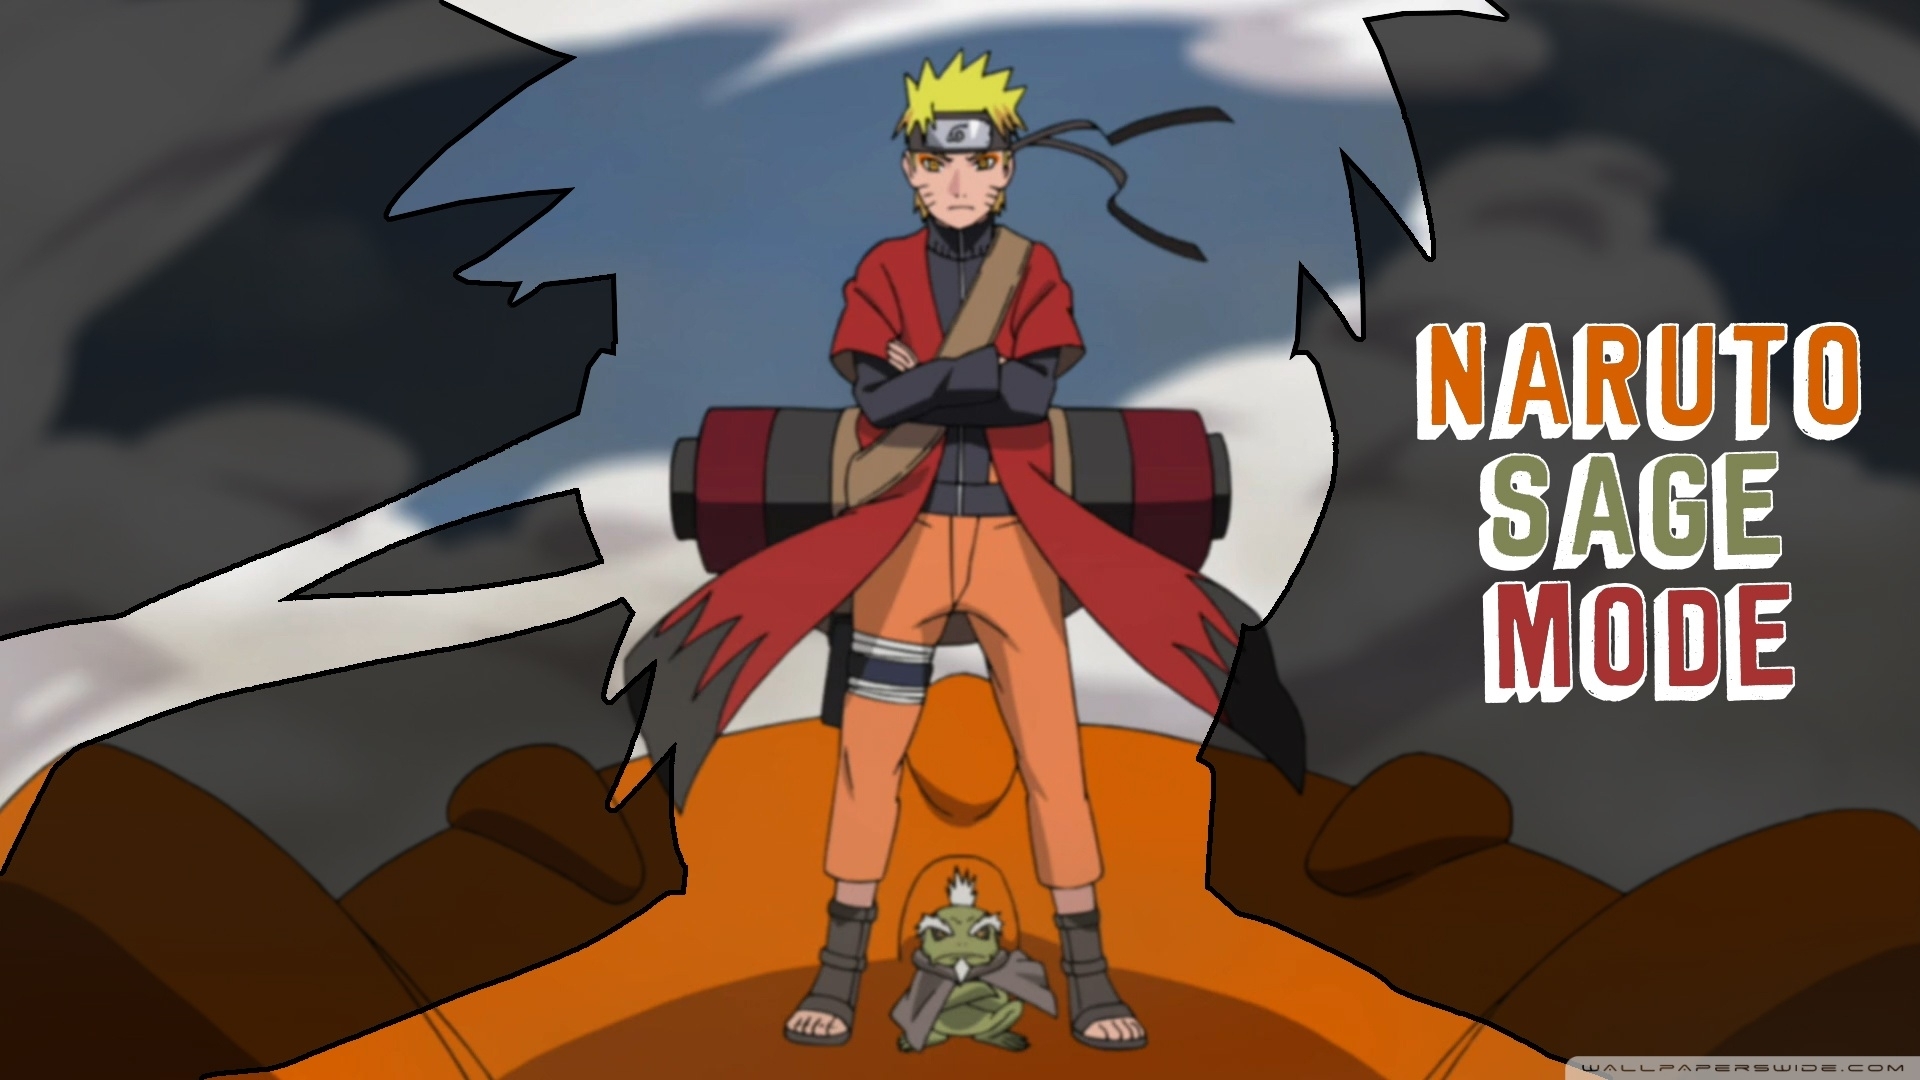 10 Latest Naruto Sage Mode Wallpaper FULL HD 1080p For PC Background